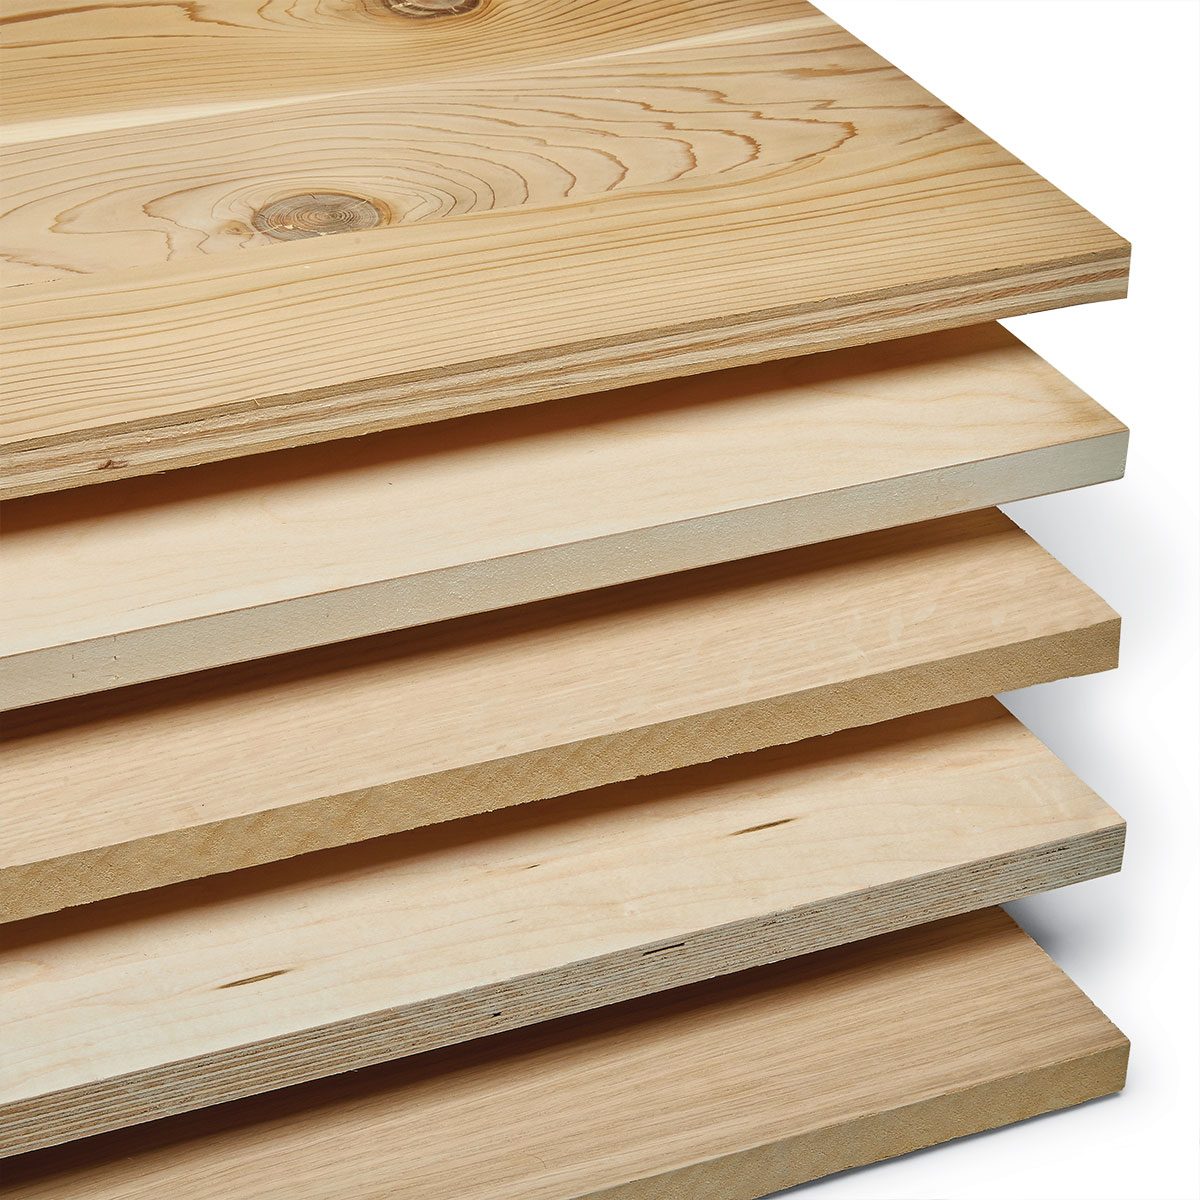 What to Know About Buying the Best Plywood